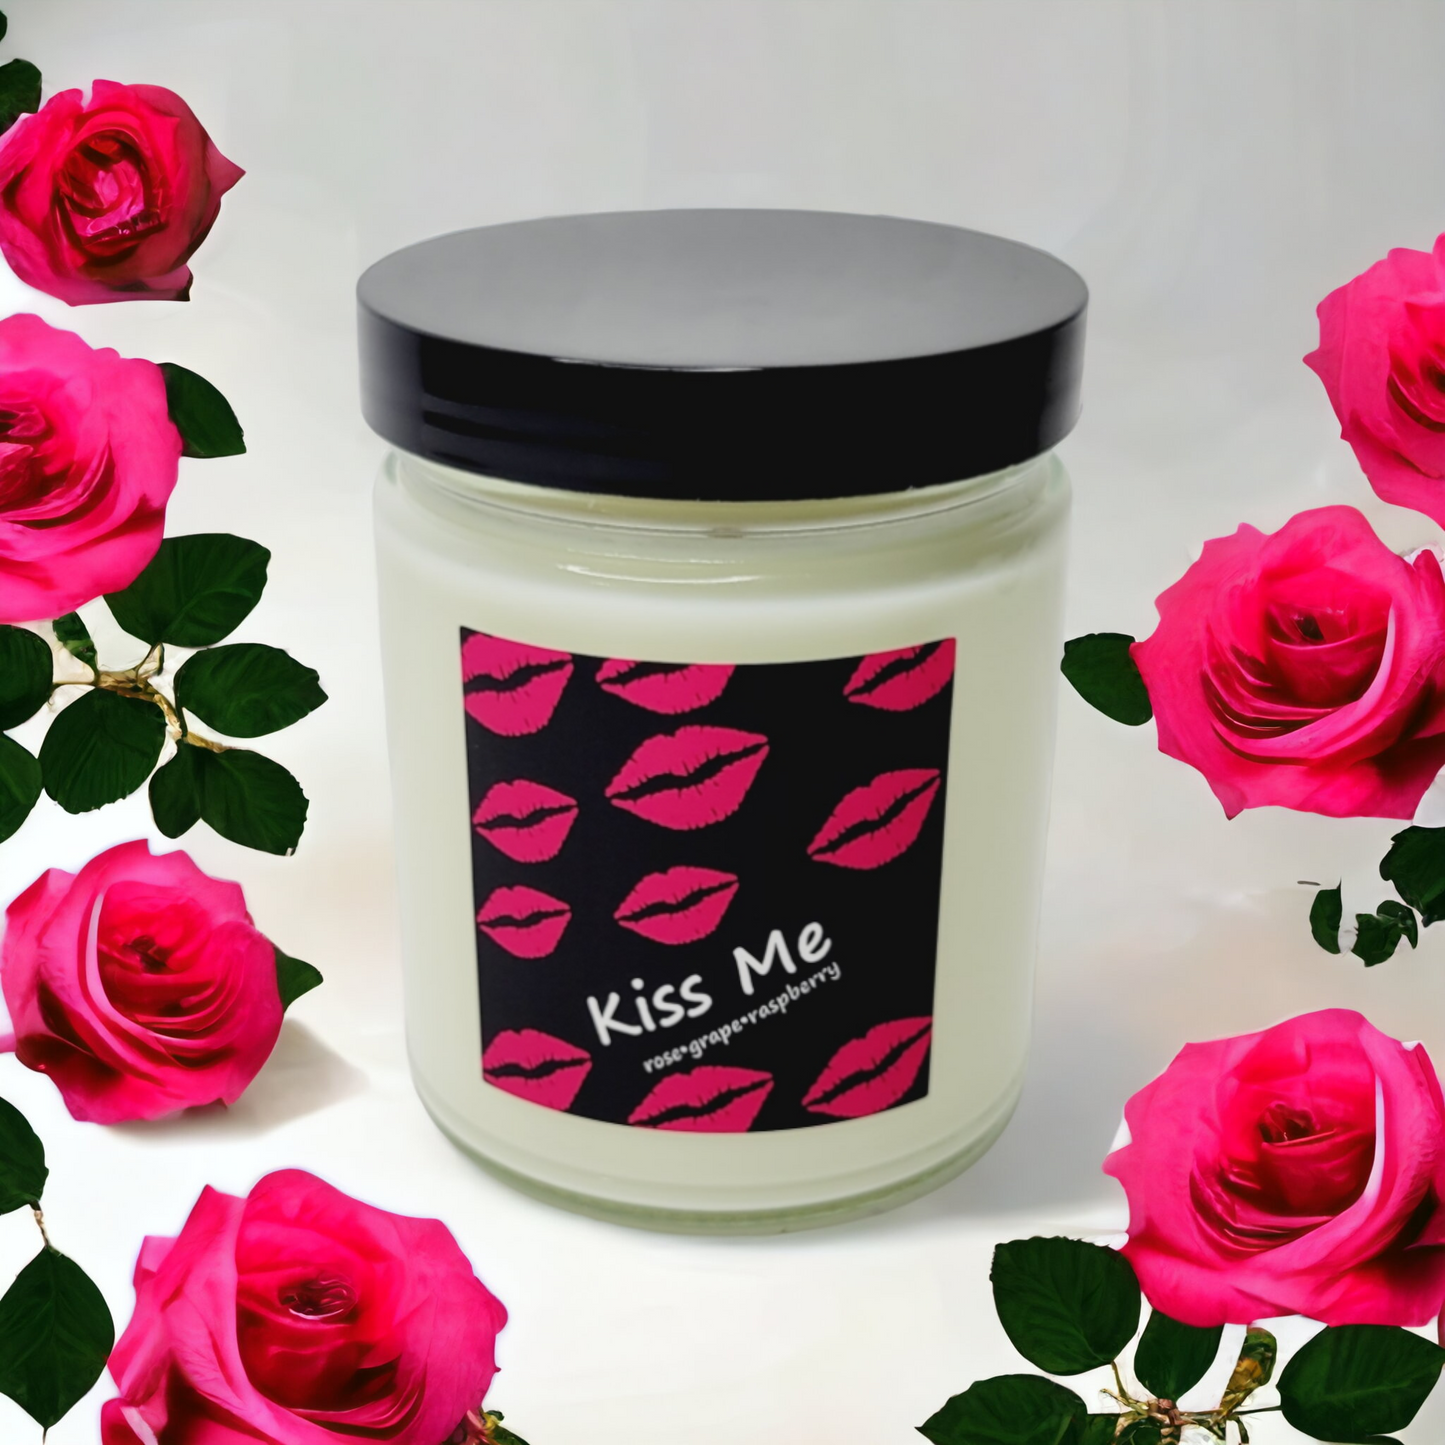 Kiss Me Soy Candle